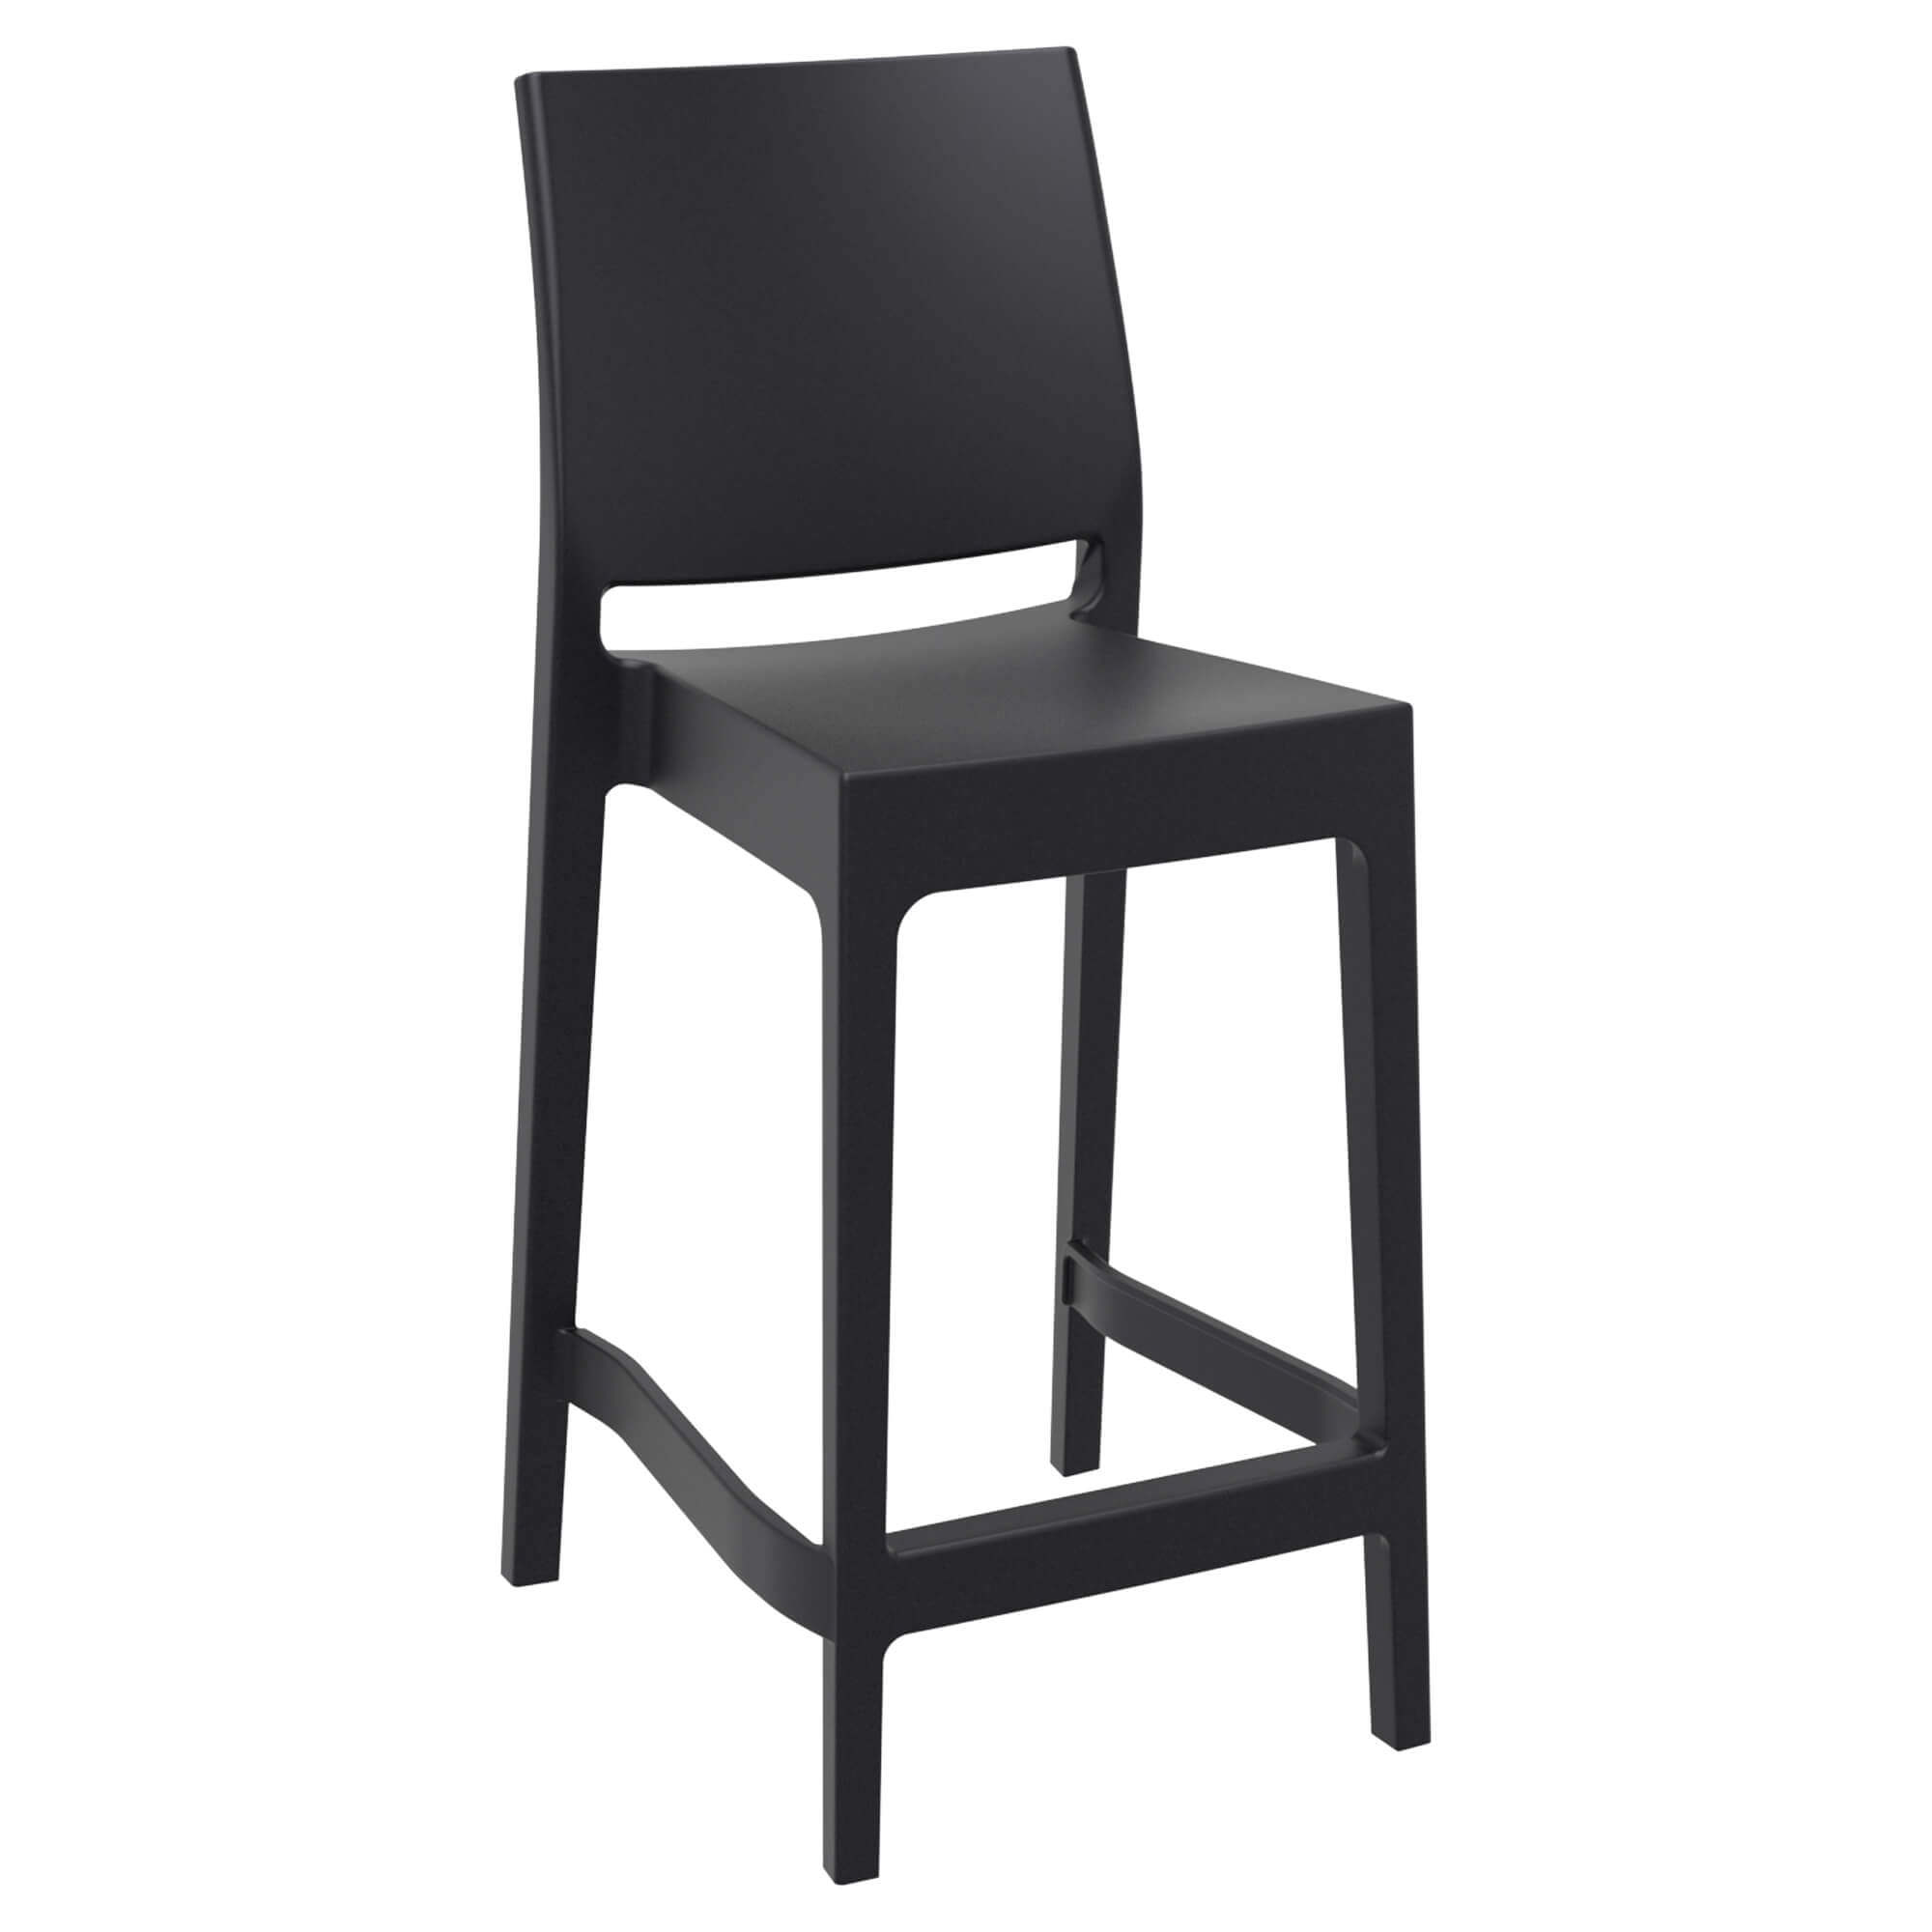 Spek Mid Height Bar Stool 65 - Black (Suitable For Outdoor)